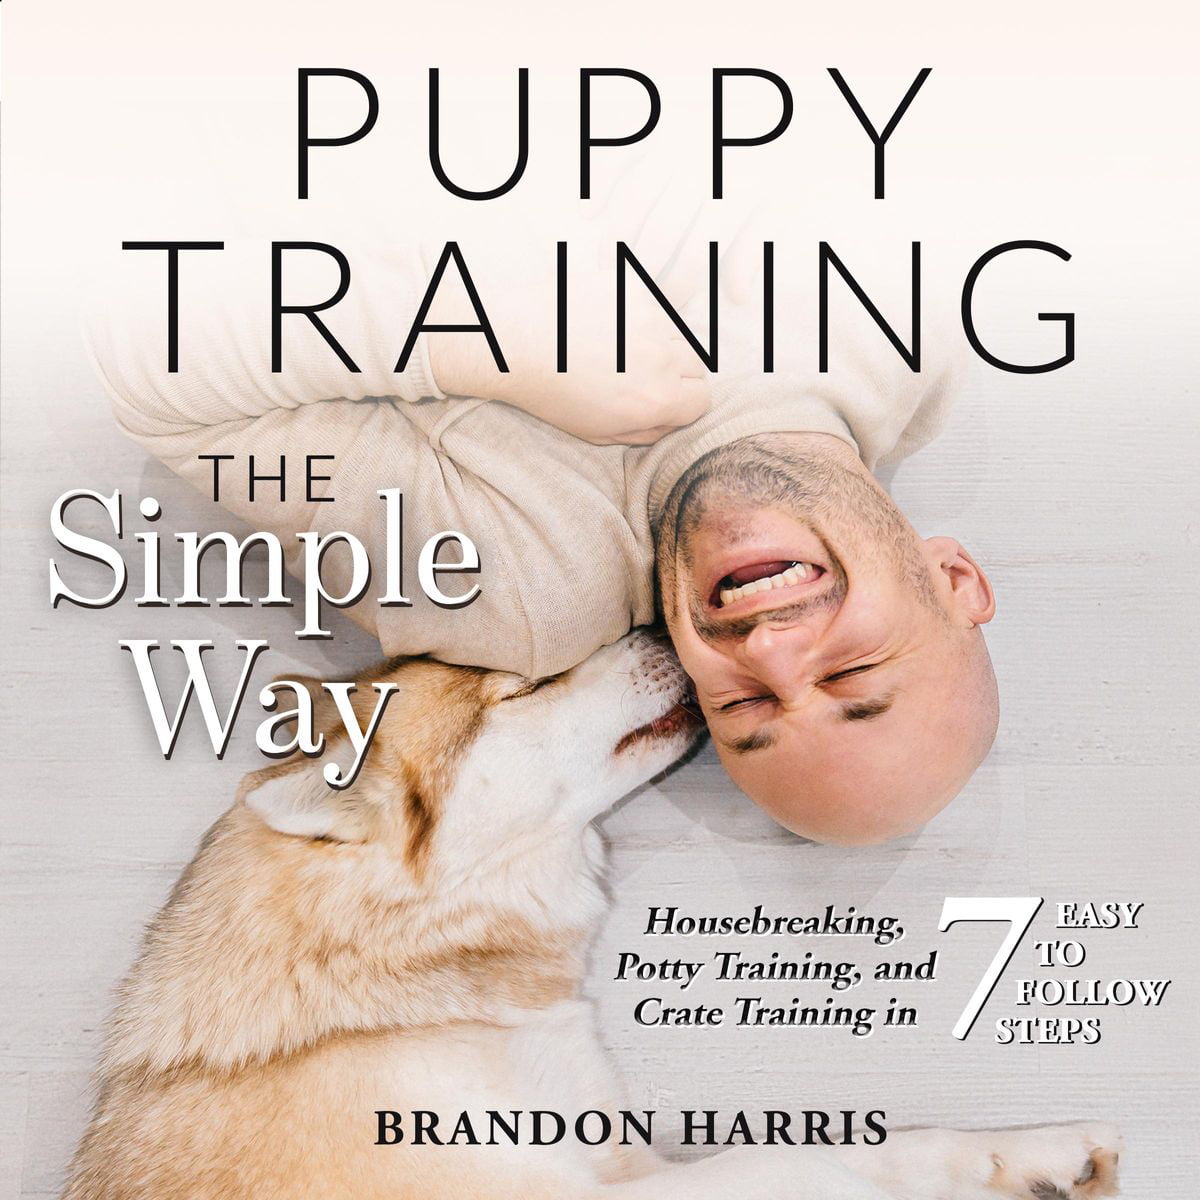 Puppy Training The Simple Way Housebreaking Potty Training And Crate Training In 7 Easy To Follow Steps Audiobook Walmart Com Walmart Com,Ham Hock And Beans Soup Recipe